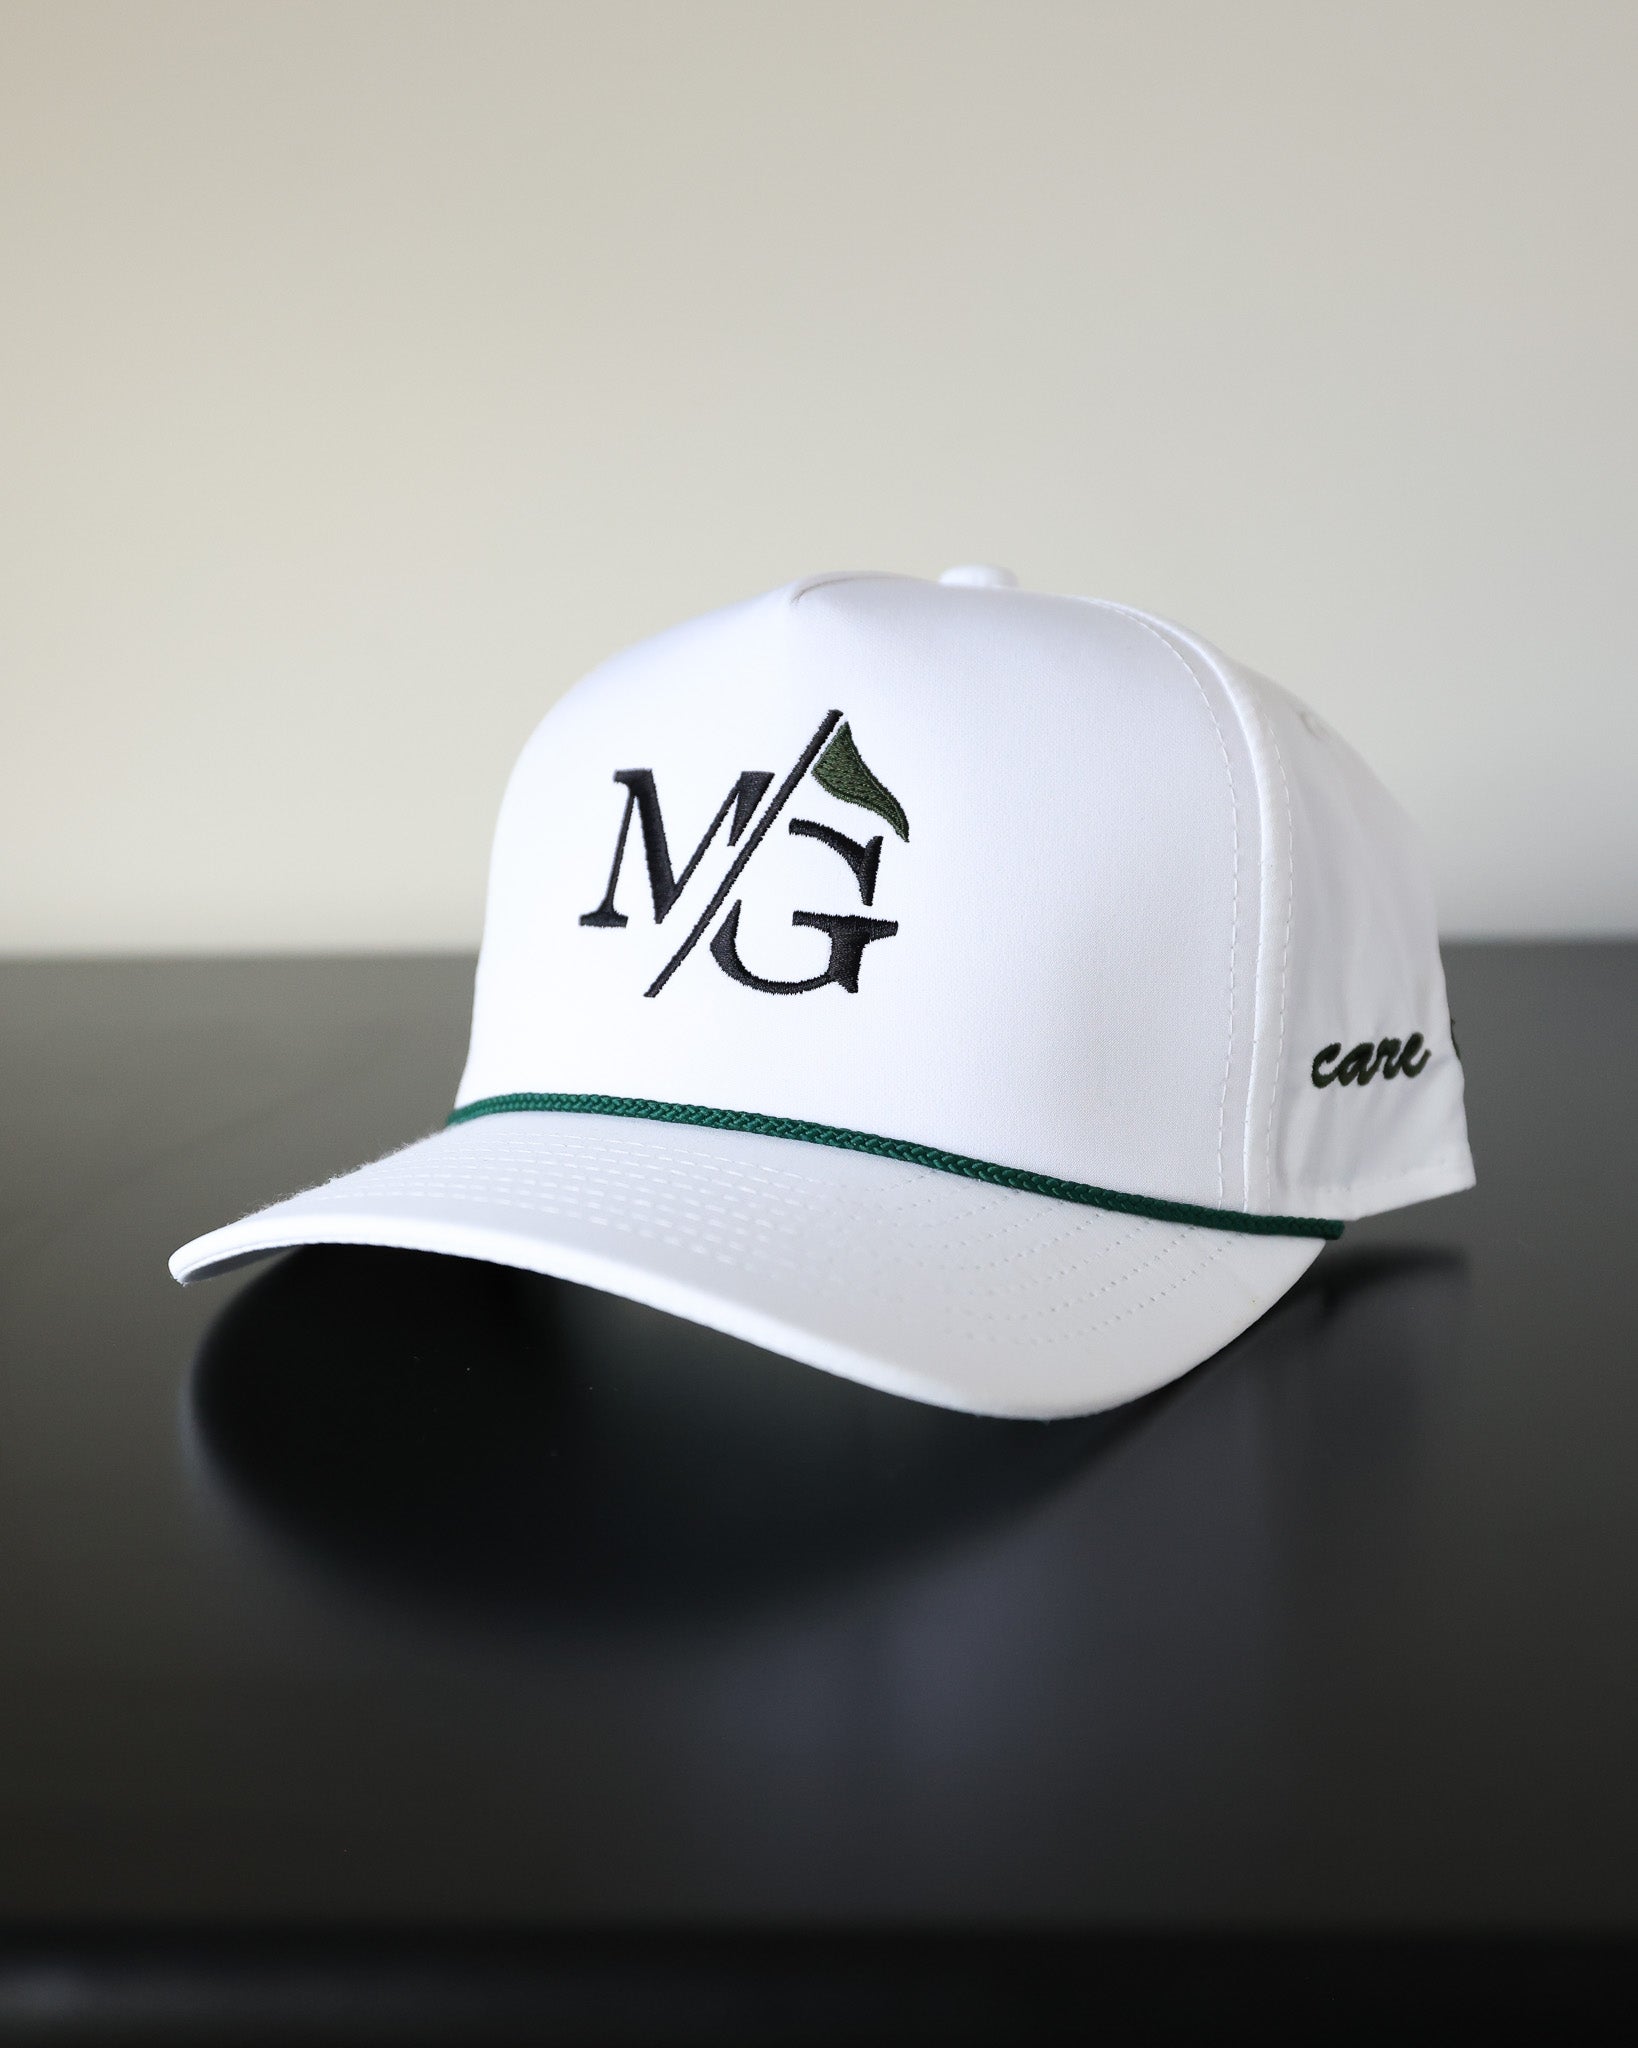 Imperial x MG - The Wrightson Rope Cap